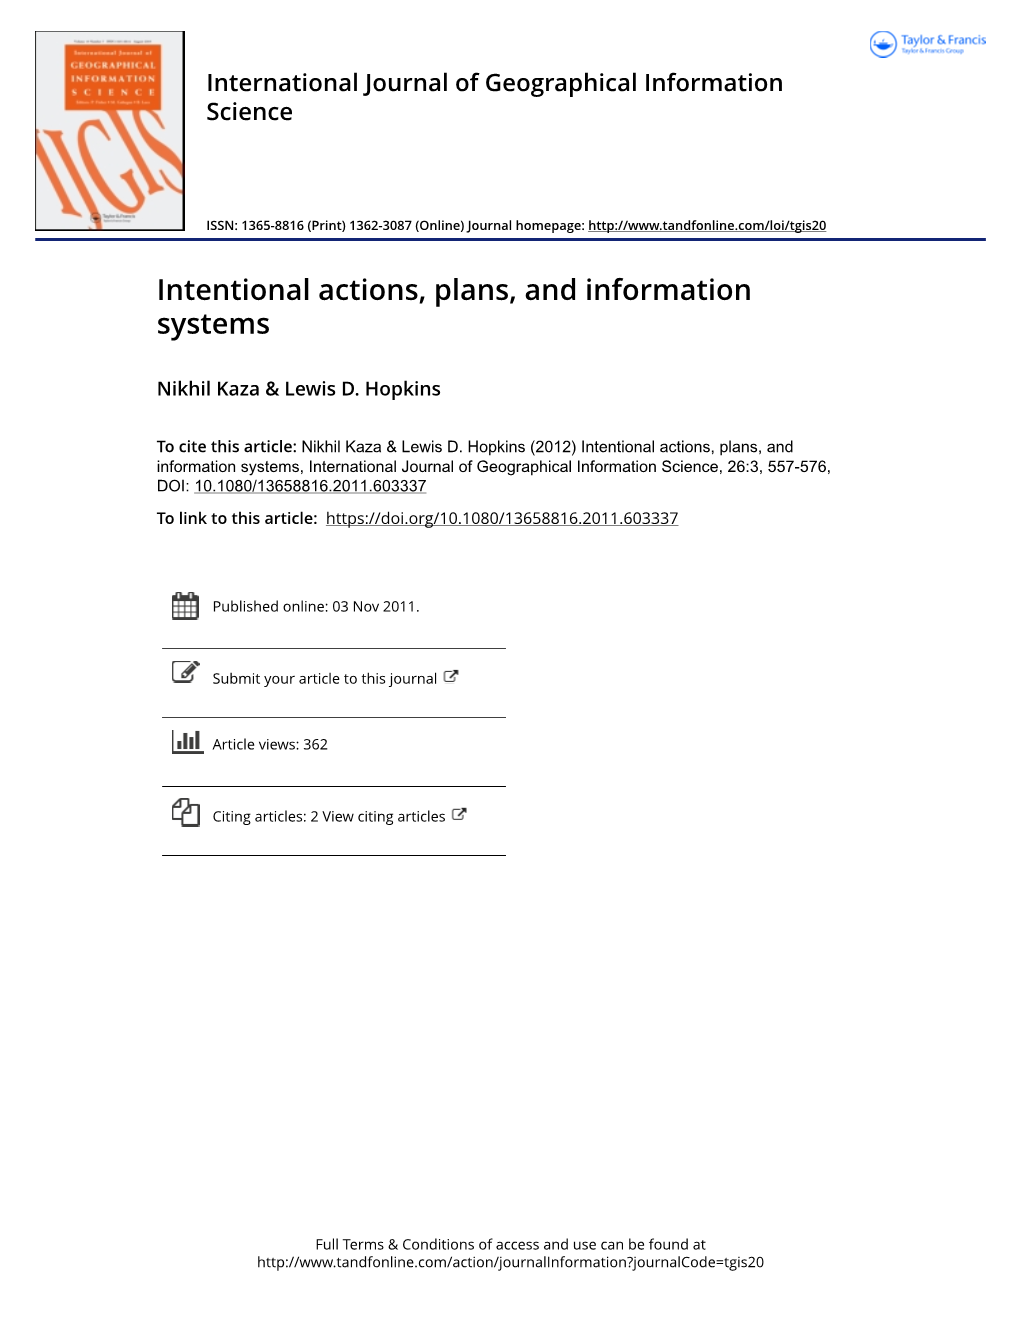 Intentional Actions, Plans, and Information Systems